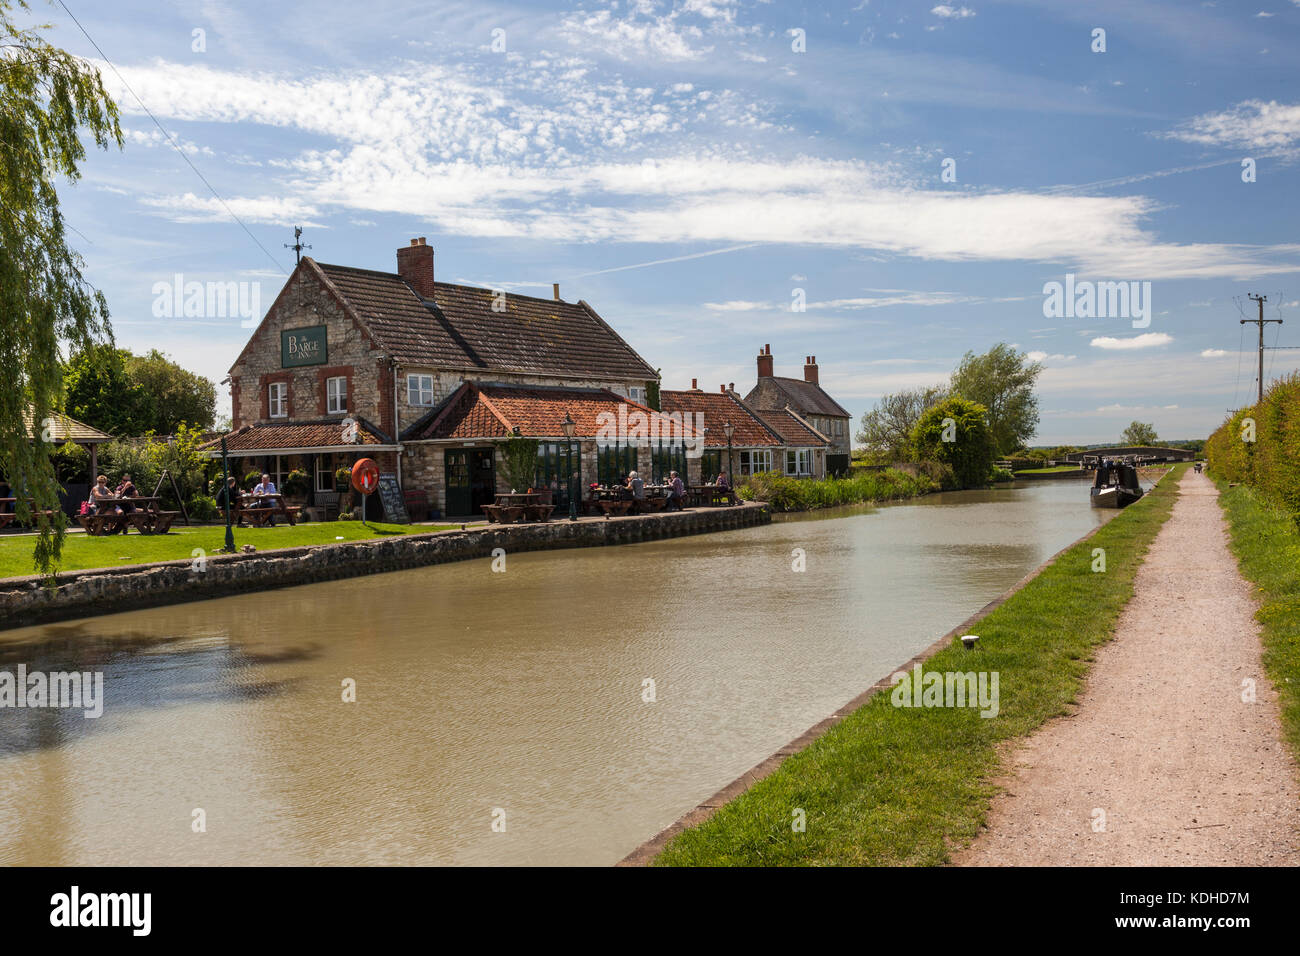 The Barge Inn overlooking the Kennet and Avon canal, Seend, Wiltshire, England, UK Stock Photo